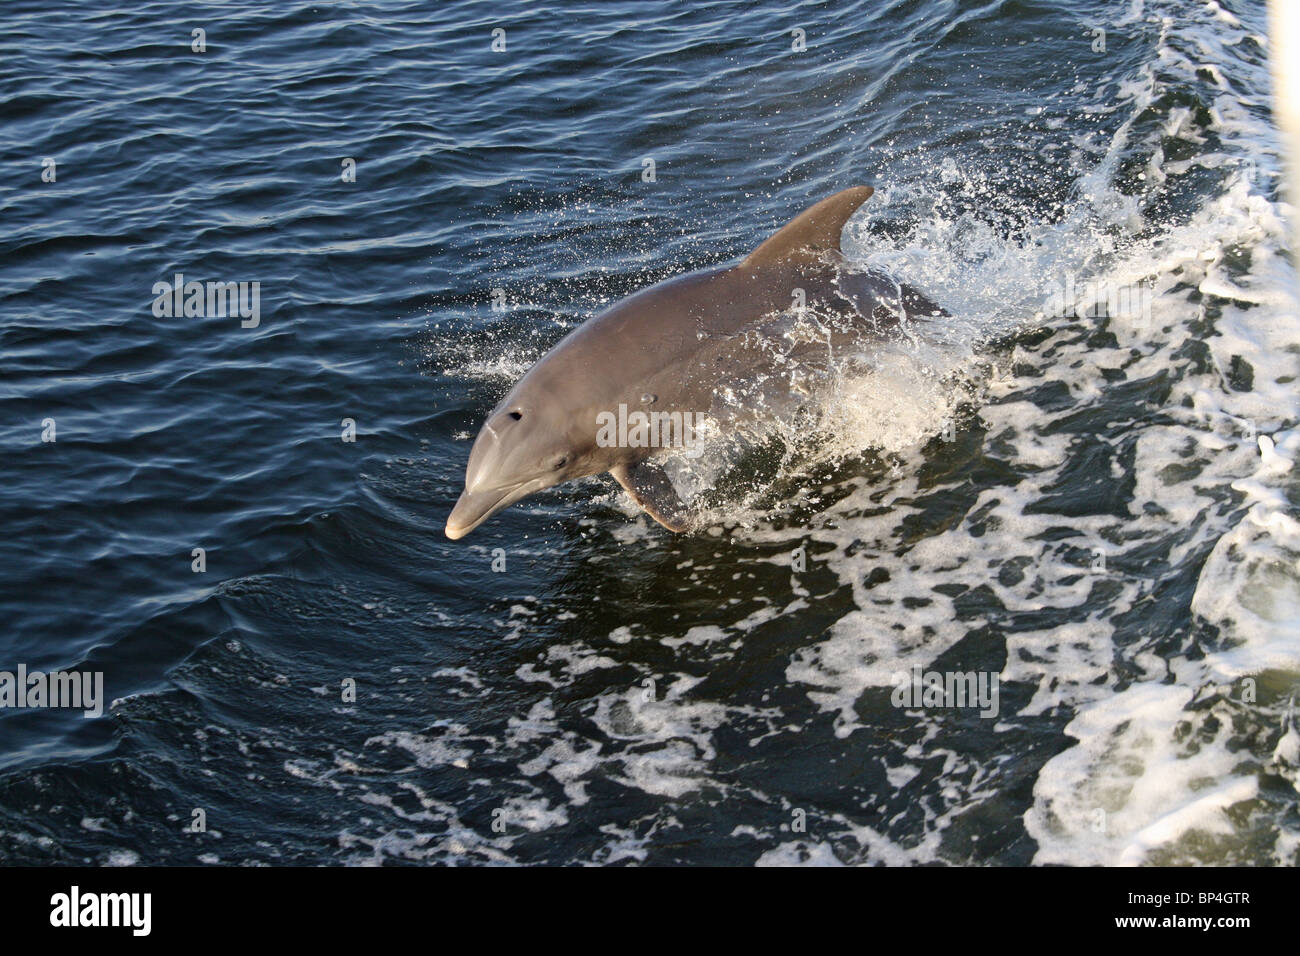 1 dolphin jumping out of the warm waters of the Gulf of Mexico in Pensacola FL Stock Photo